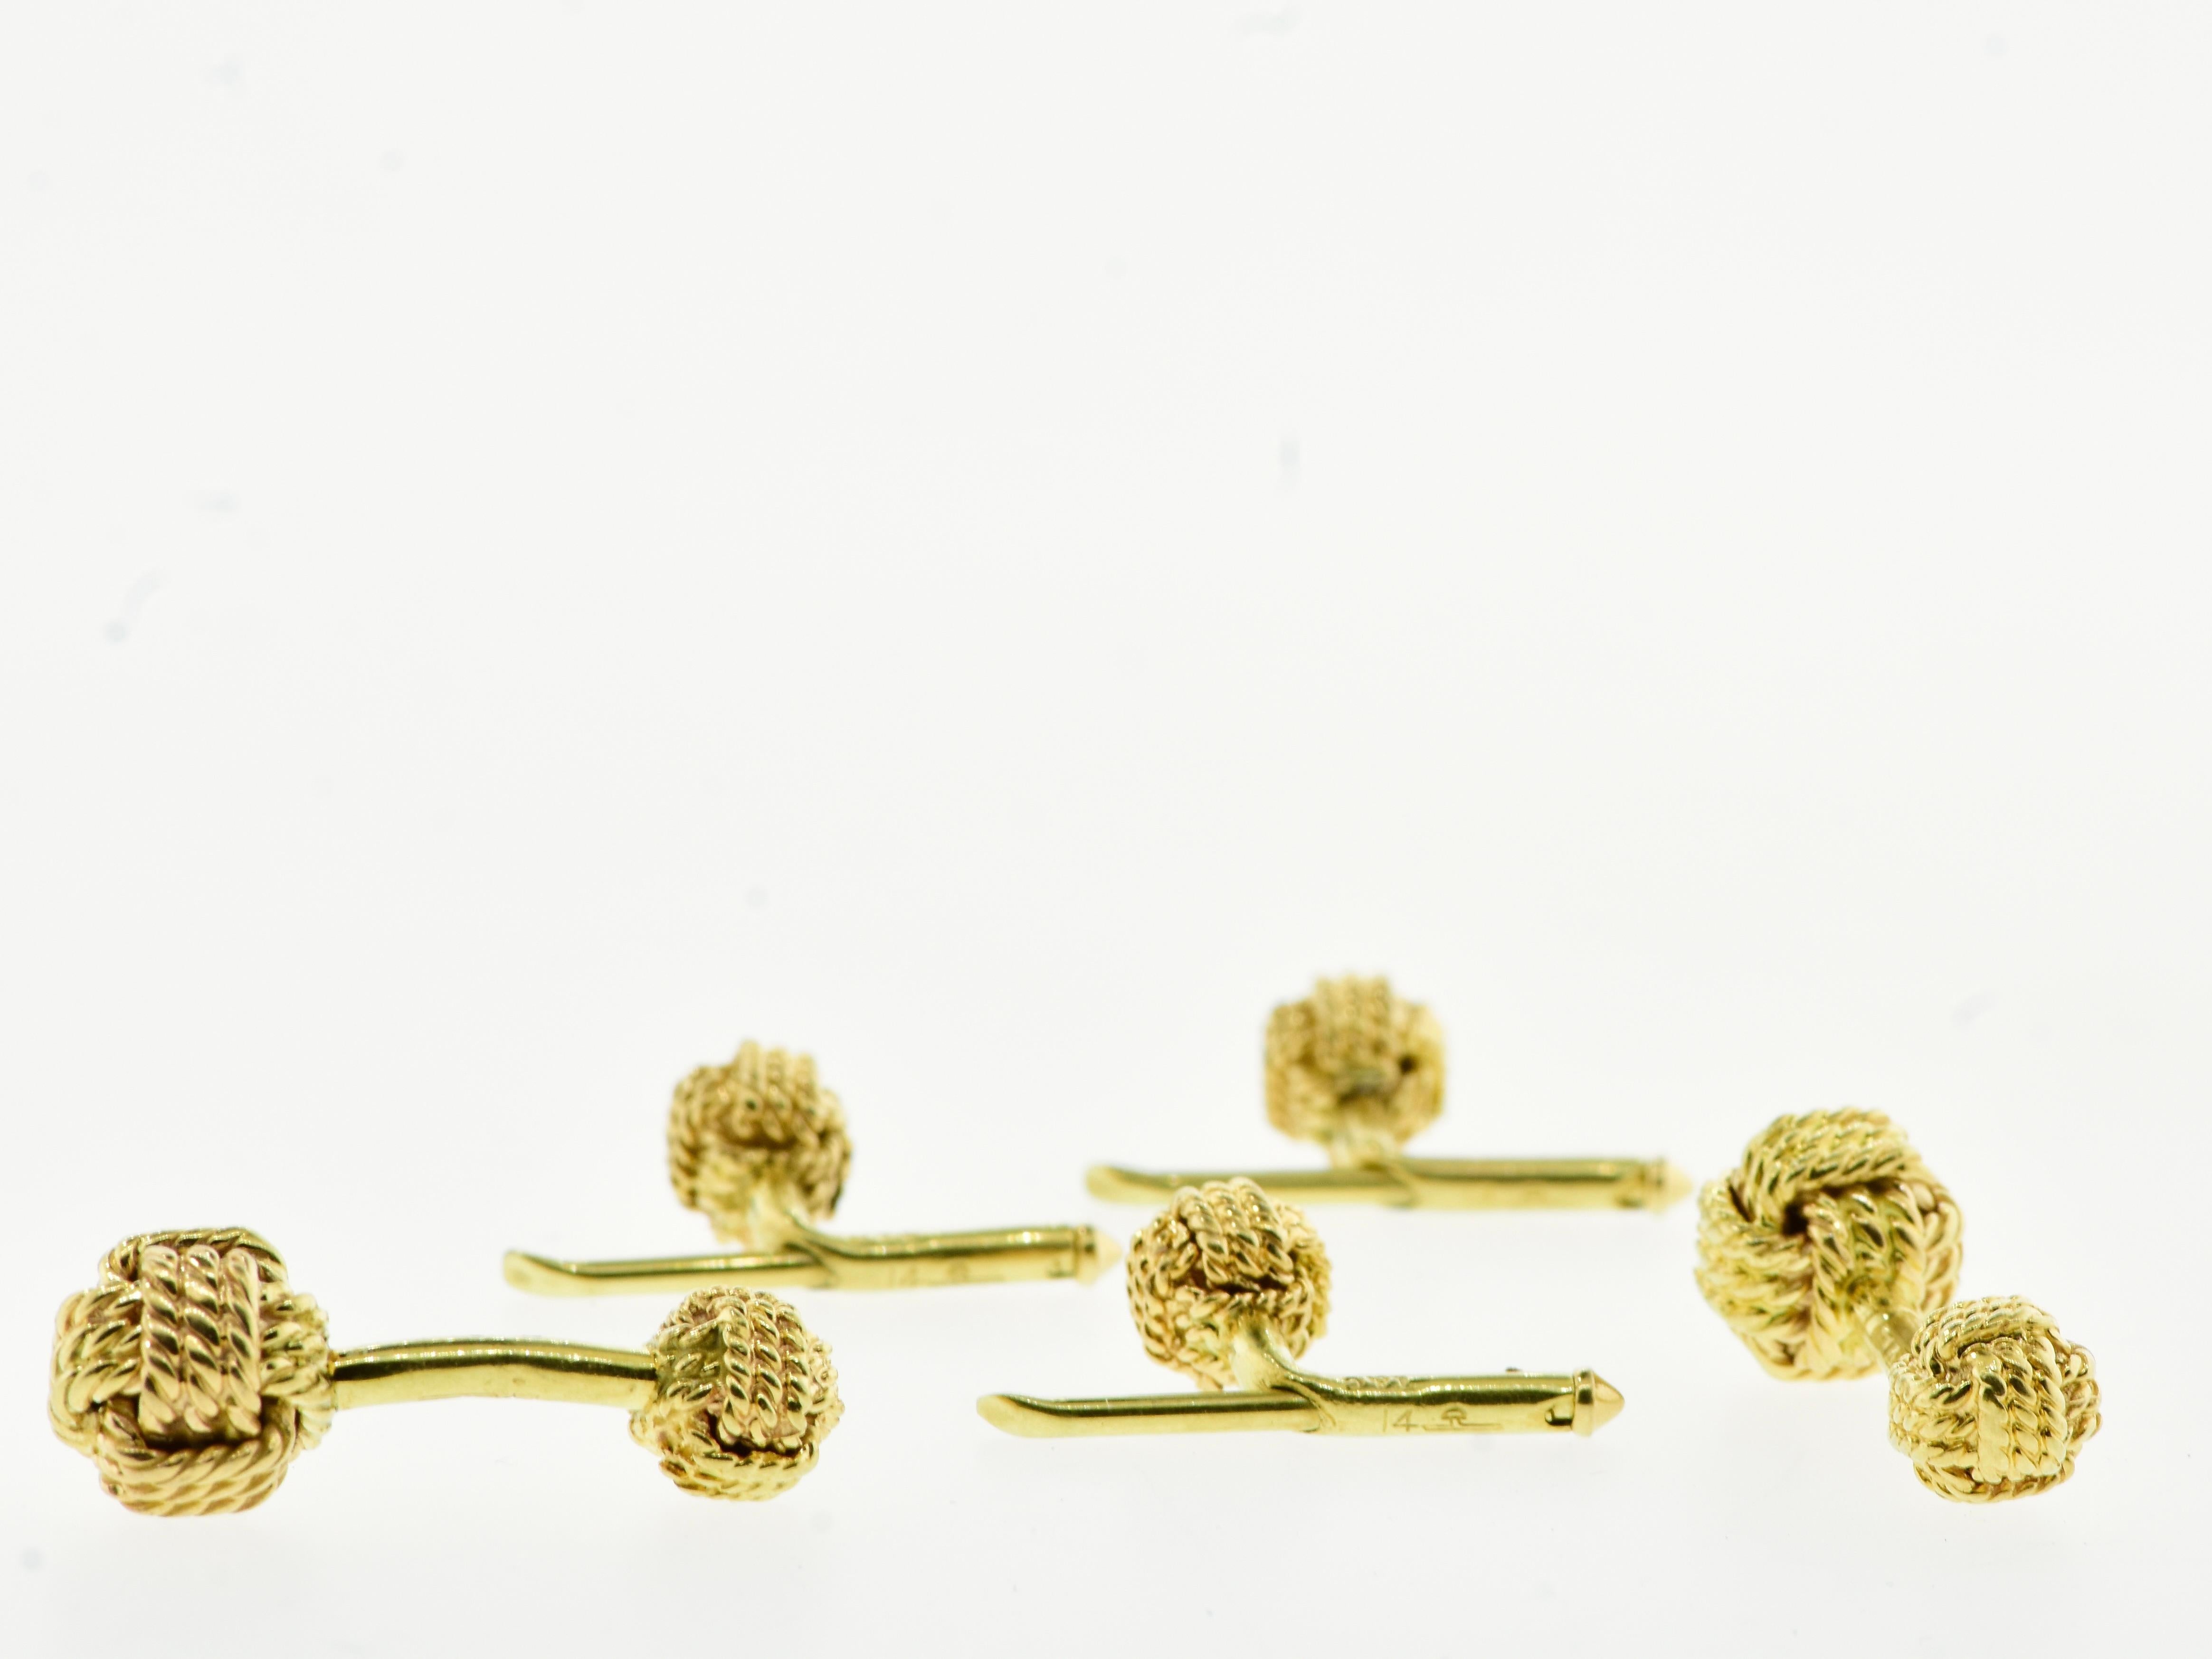 Tiffany & Co. Yellow Gold Cuff & Stud Set in a Love Knot Motif, Vintage, c. 1970 For Sale 5